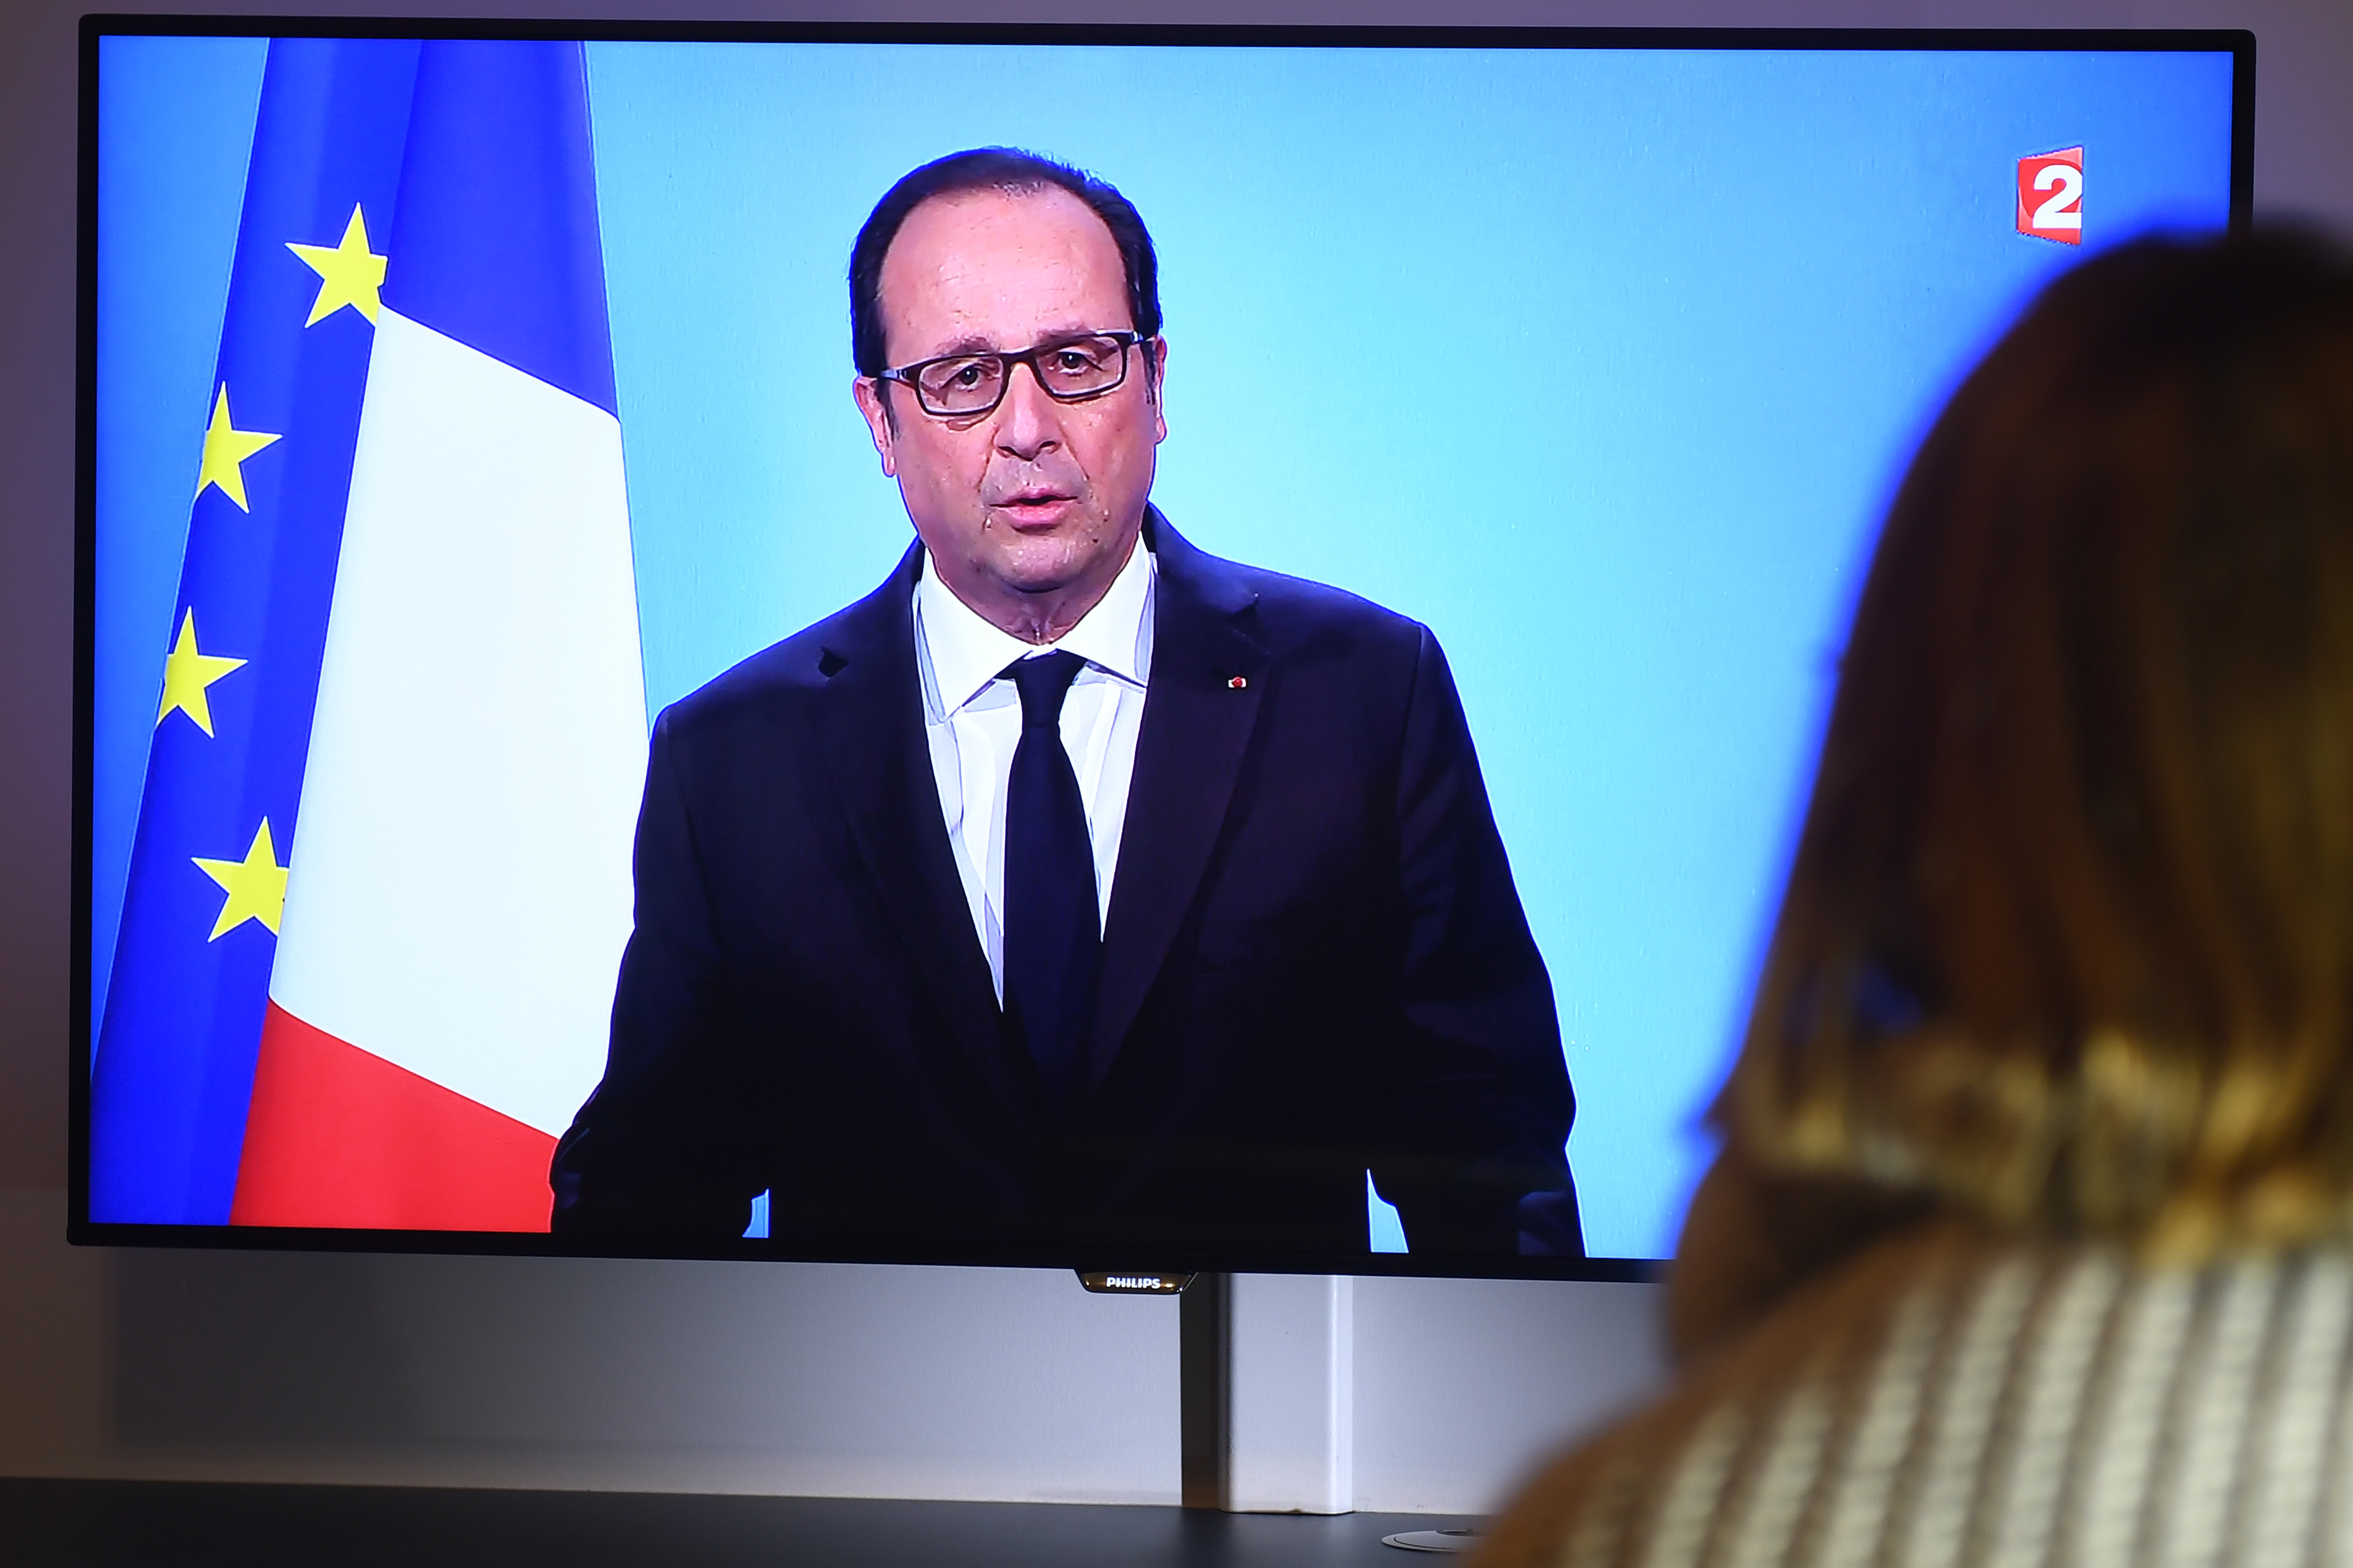 A person watches on December 1, 2016 a TV screen showing French President Francois Hollande announcing his renouncement to run for the next French presidential elections. Francois Hollande dramatically announced he would not seek re-election next year as he bowed to historic low approval ratings after a troubled five years in power. The withdrawal means the 62-year-old Socialist leader is the first president of France's fifth republic, founded in 1958, to step aside after only one term.  / AFP PHOTO / DAMIEN MEYER